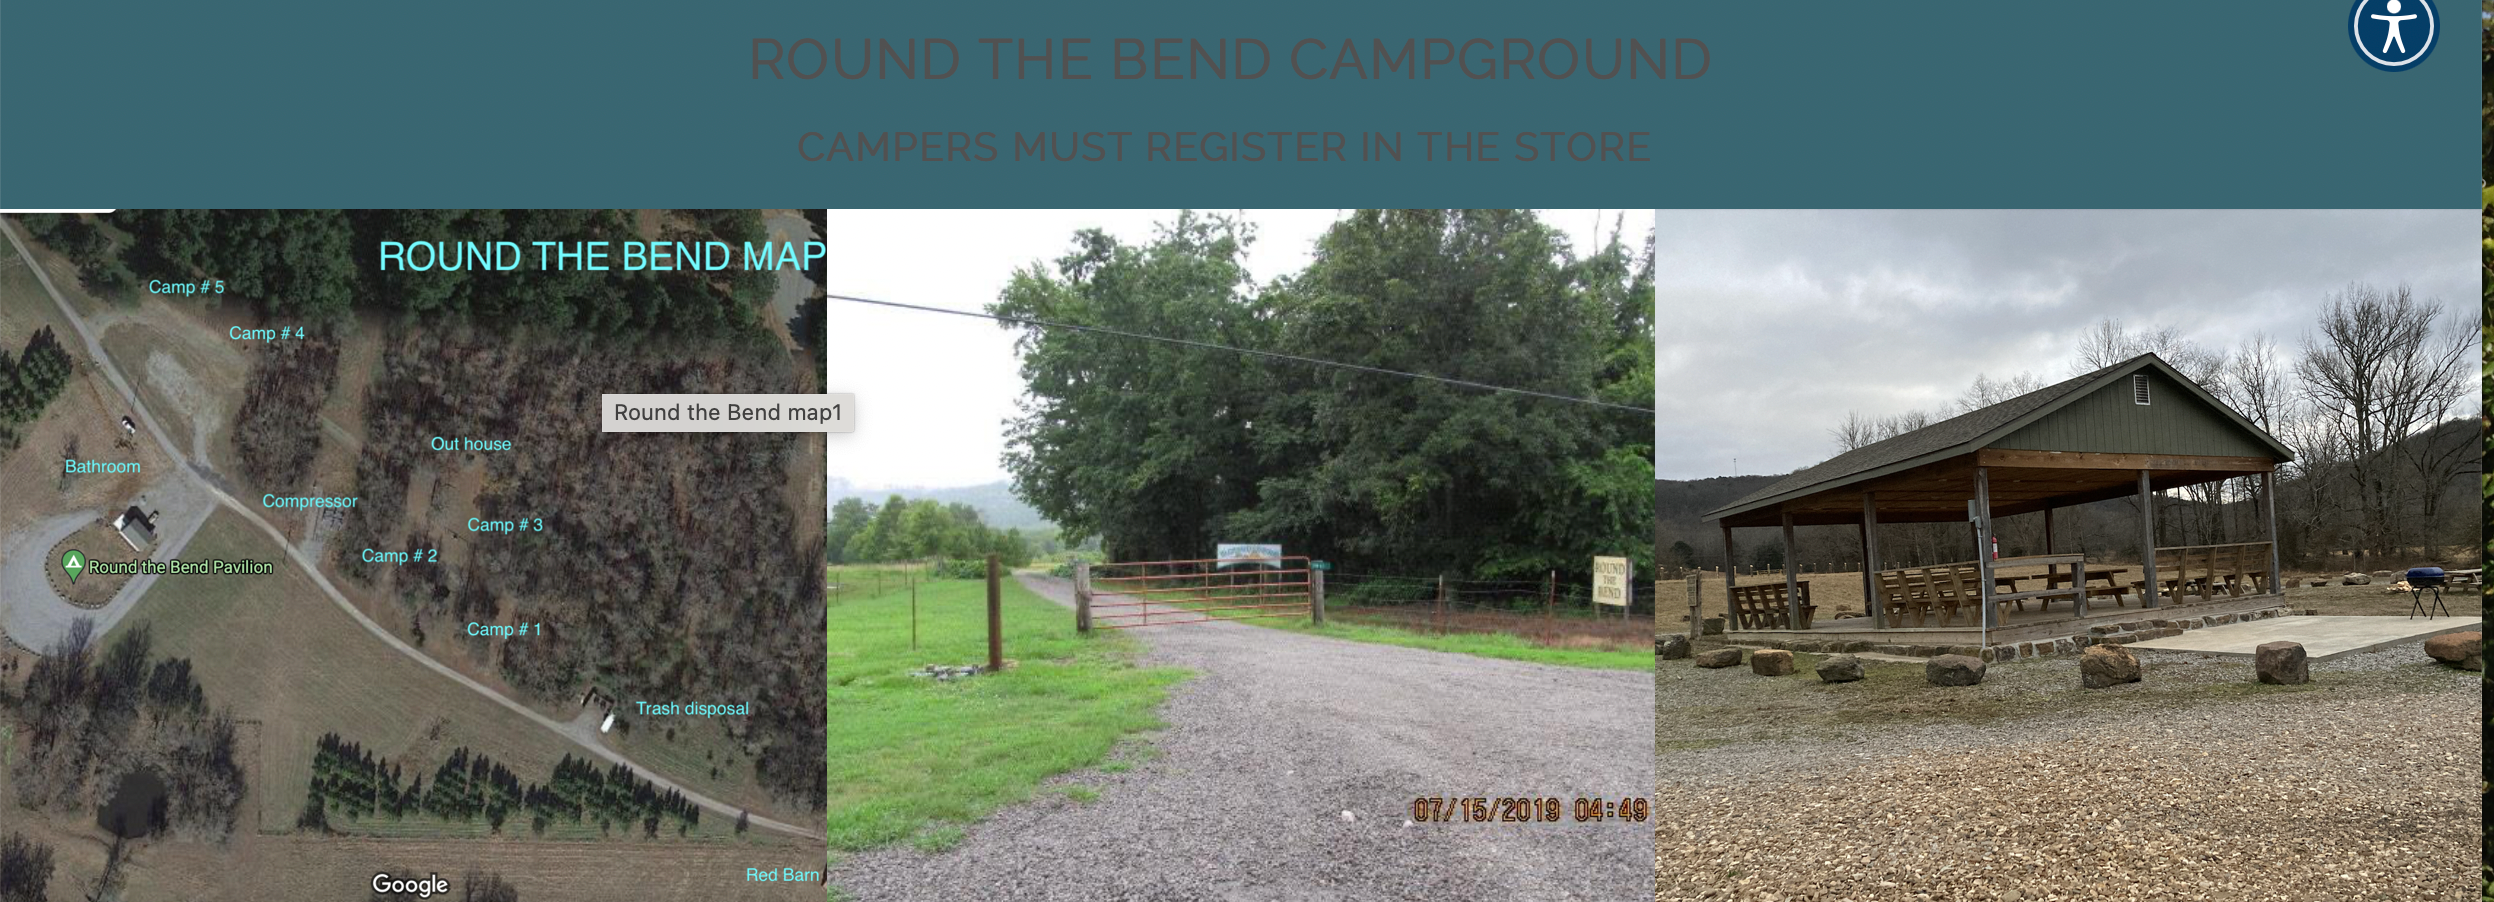 Camper submitted image from Round the Bend RV Campground - 2